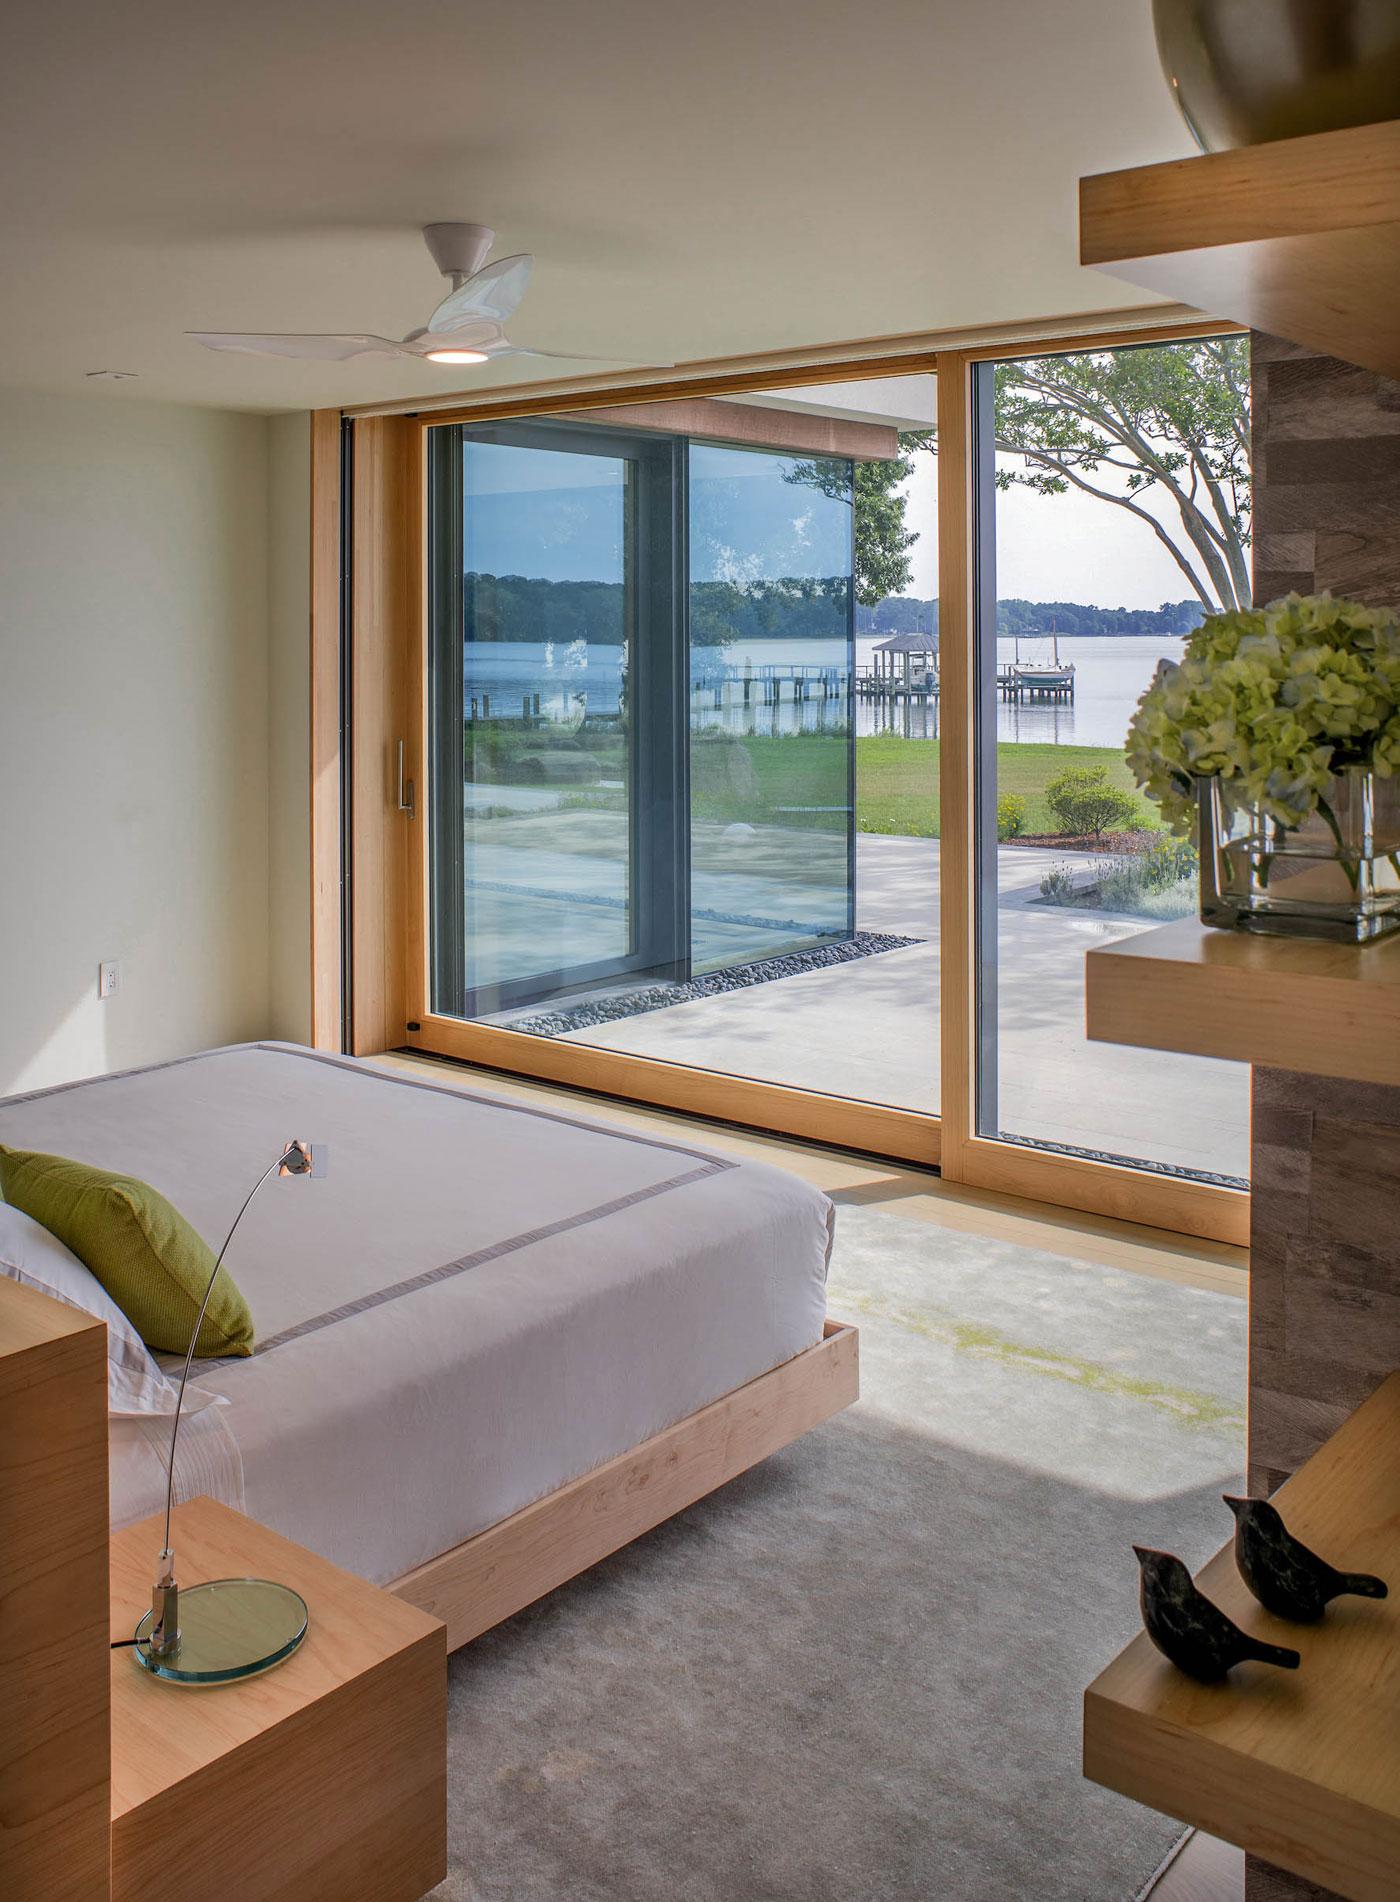 Bedroom with full length windows overlooking the water